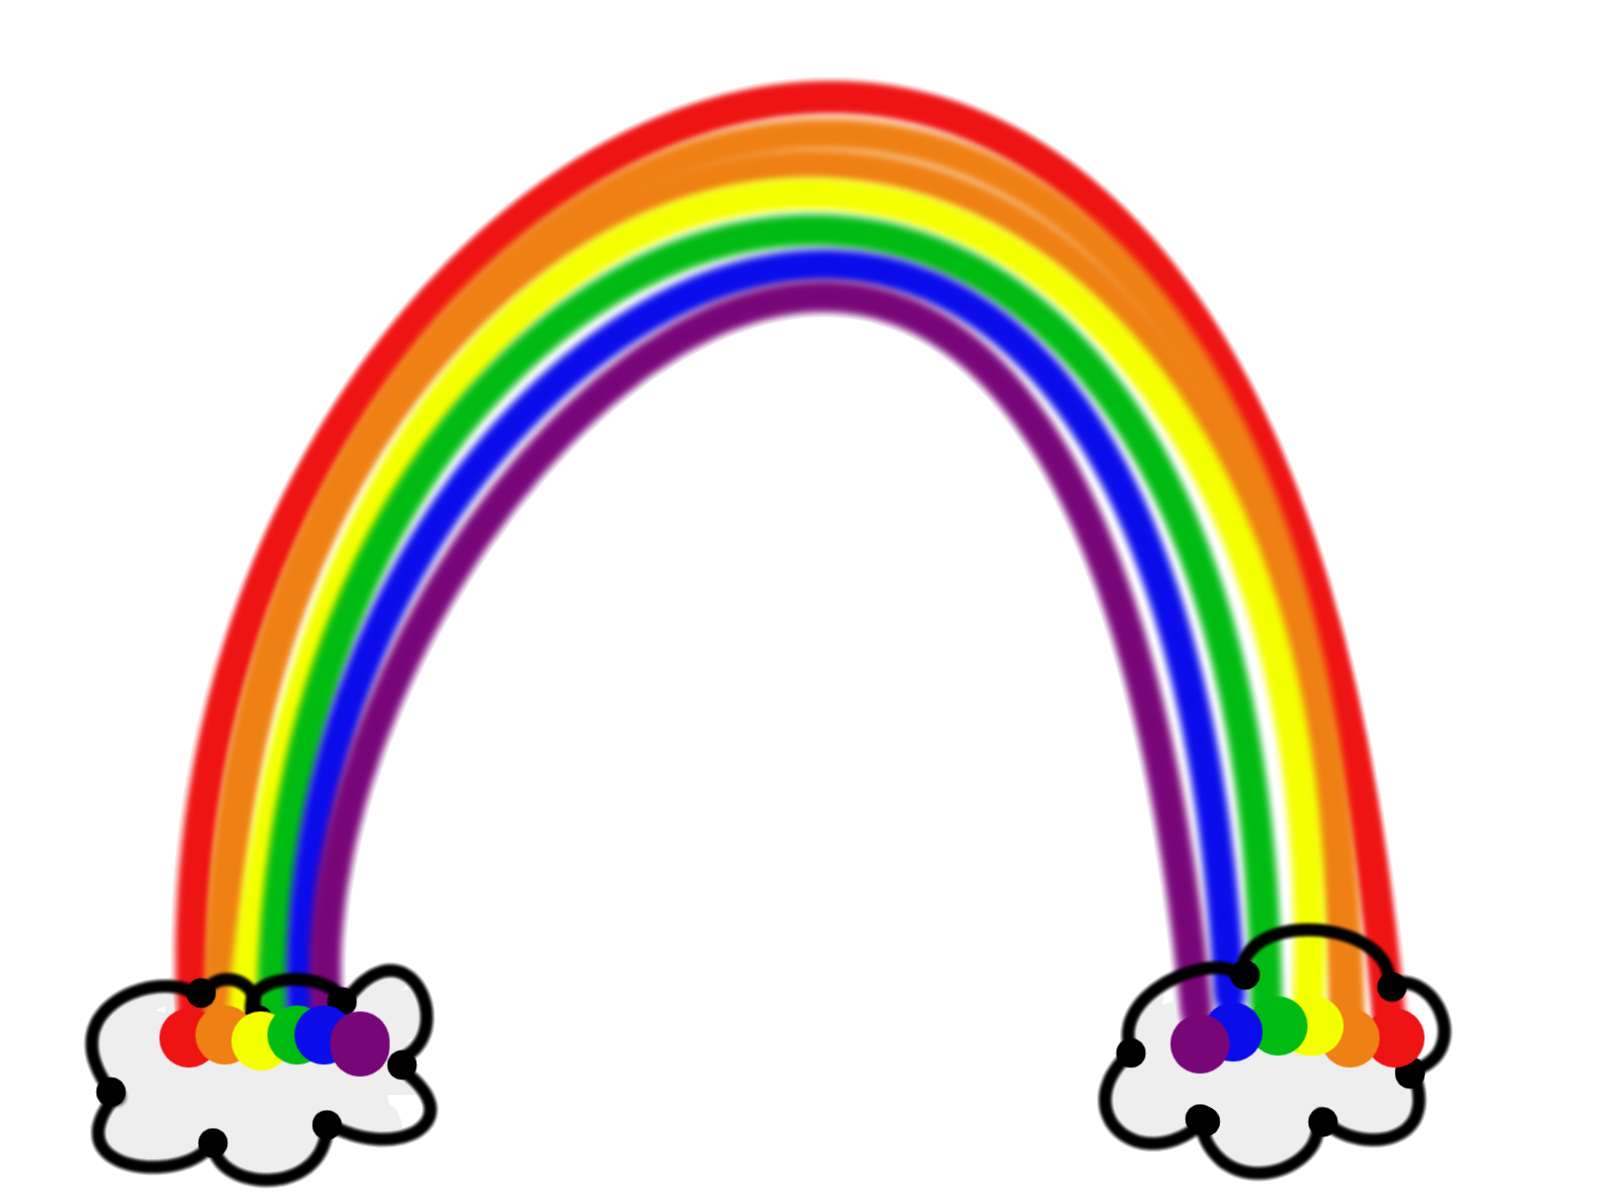 March clipart rainbow. For kids panda free